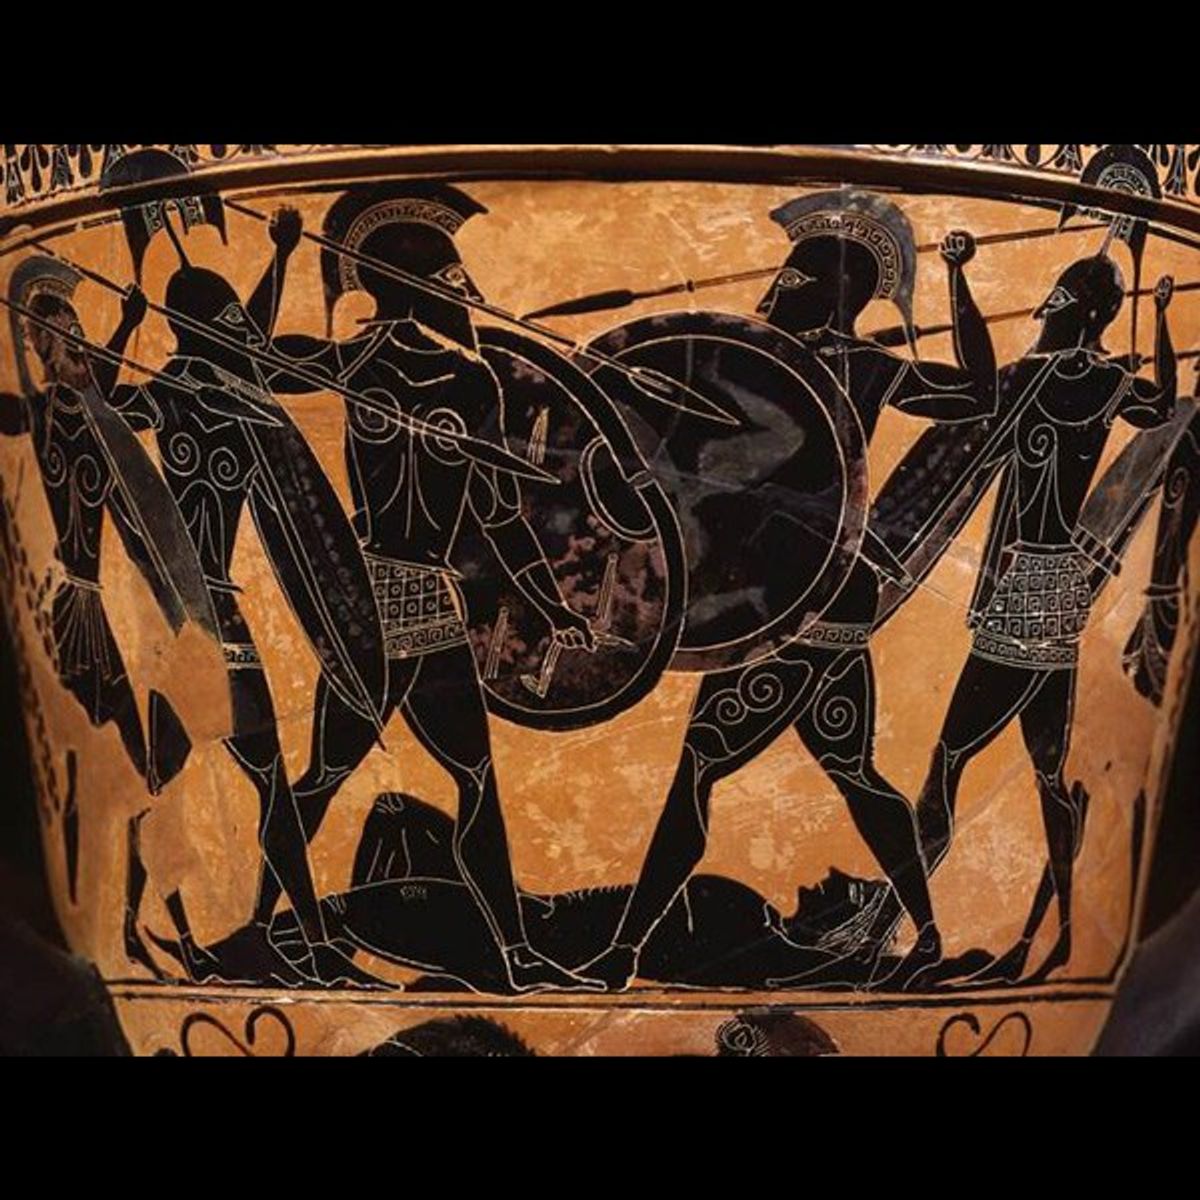 The Iliad And Its Gospel Parallels